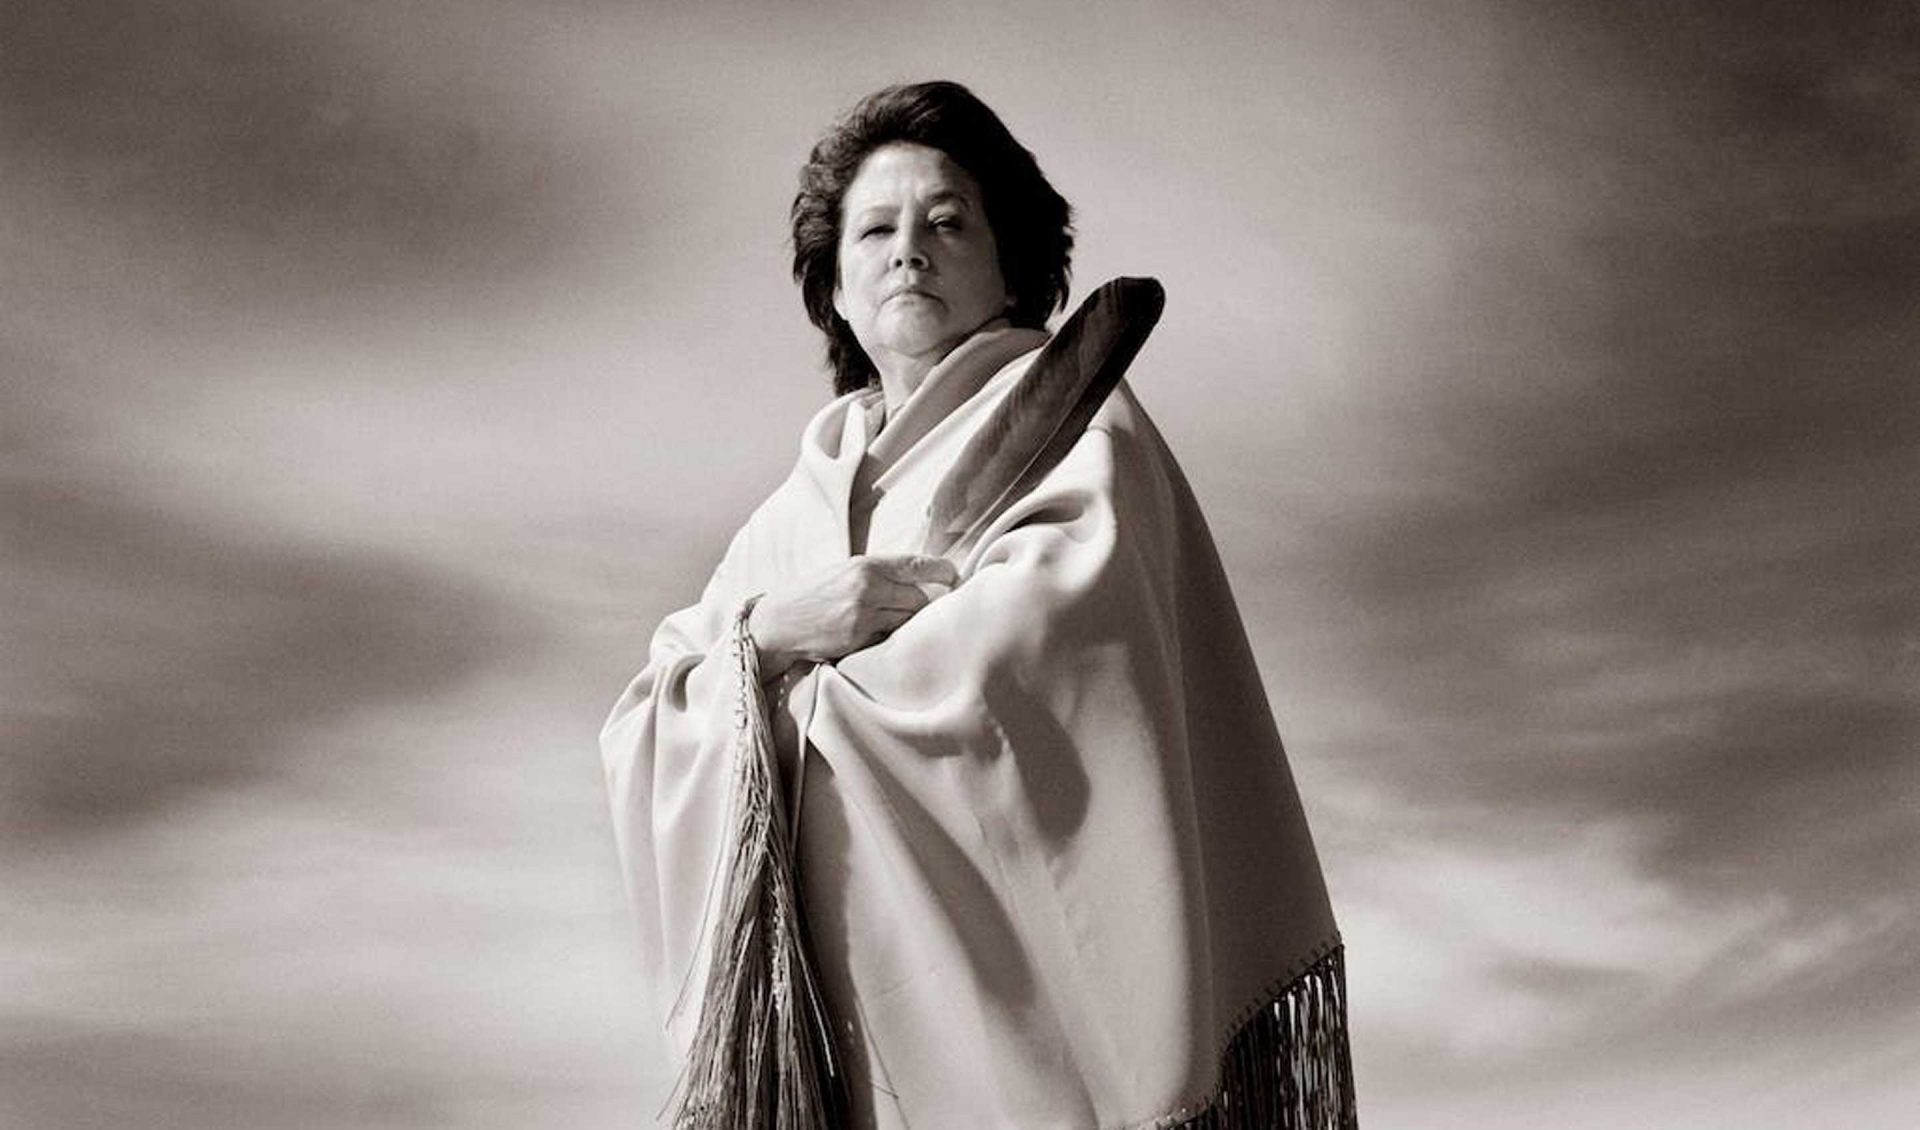 Portrait of Elouise Cobell from the “100 Years: One Woman’s Fight for Justice” film poster